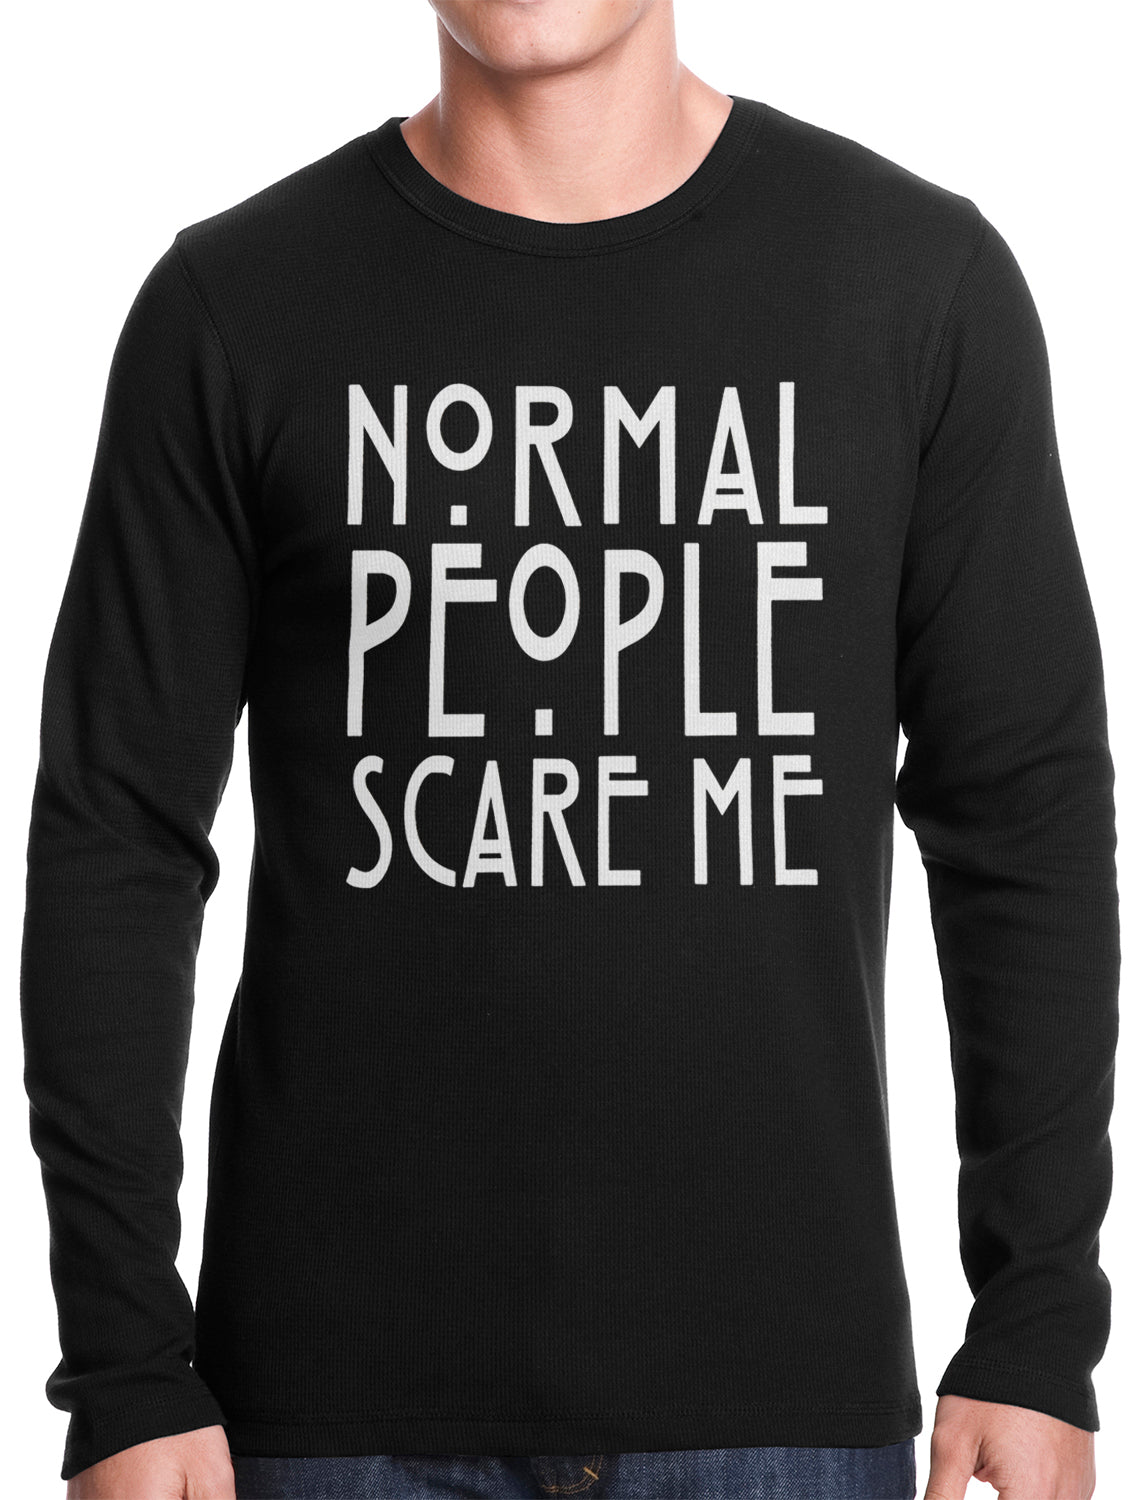 Normal People Scare Me Thermal Shirt